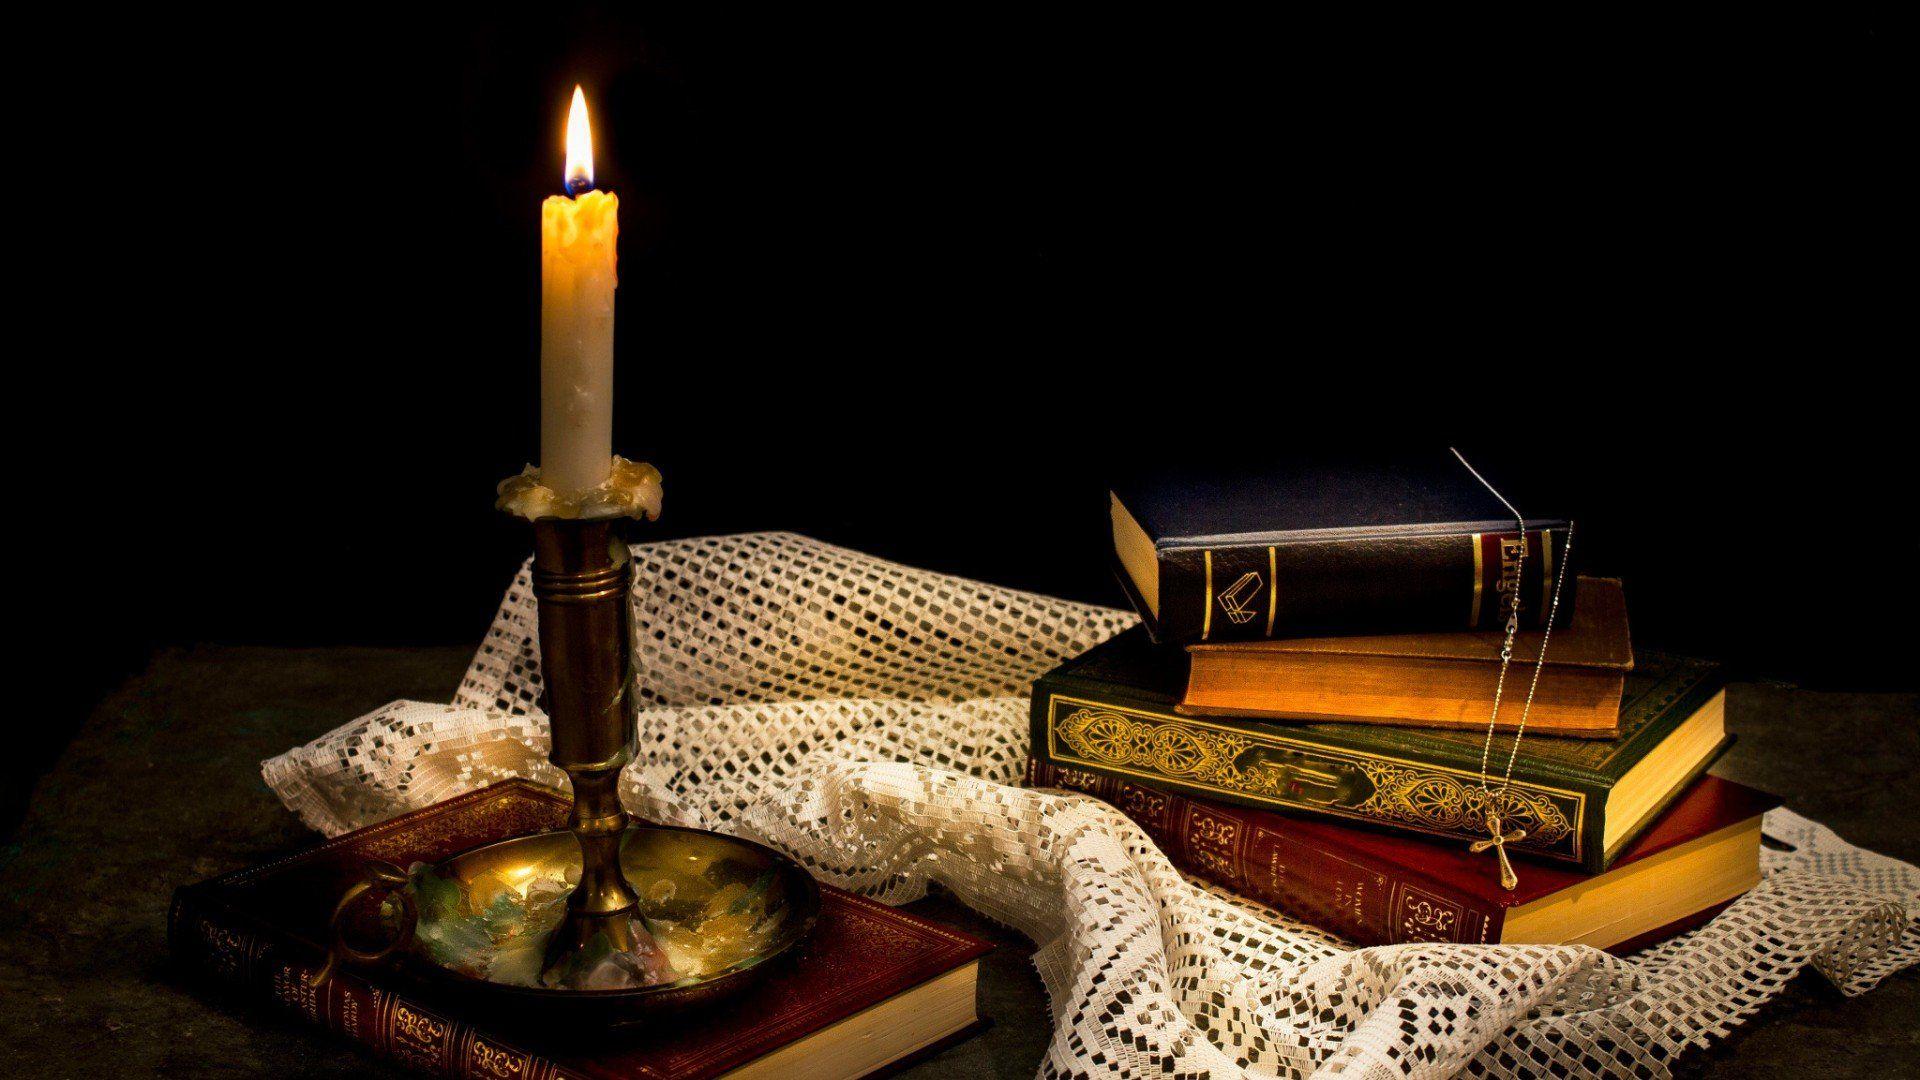 CANDLE OLD BOOKS wallpaperx1080